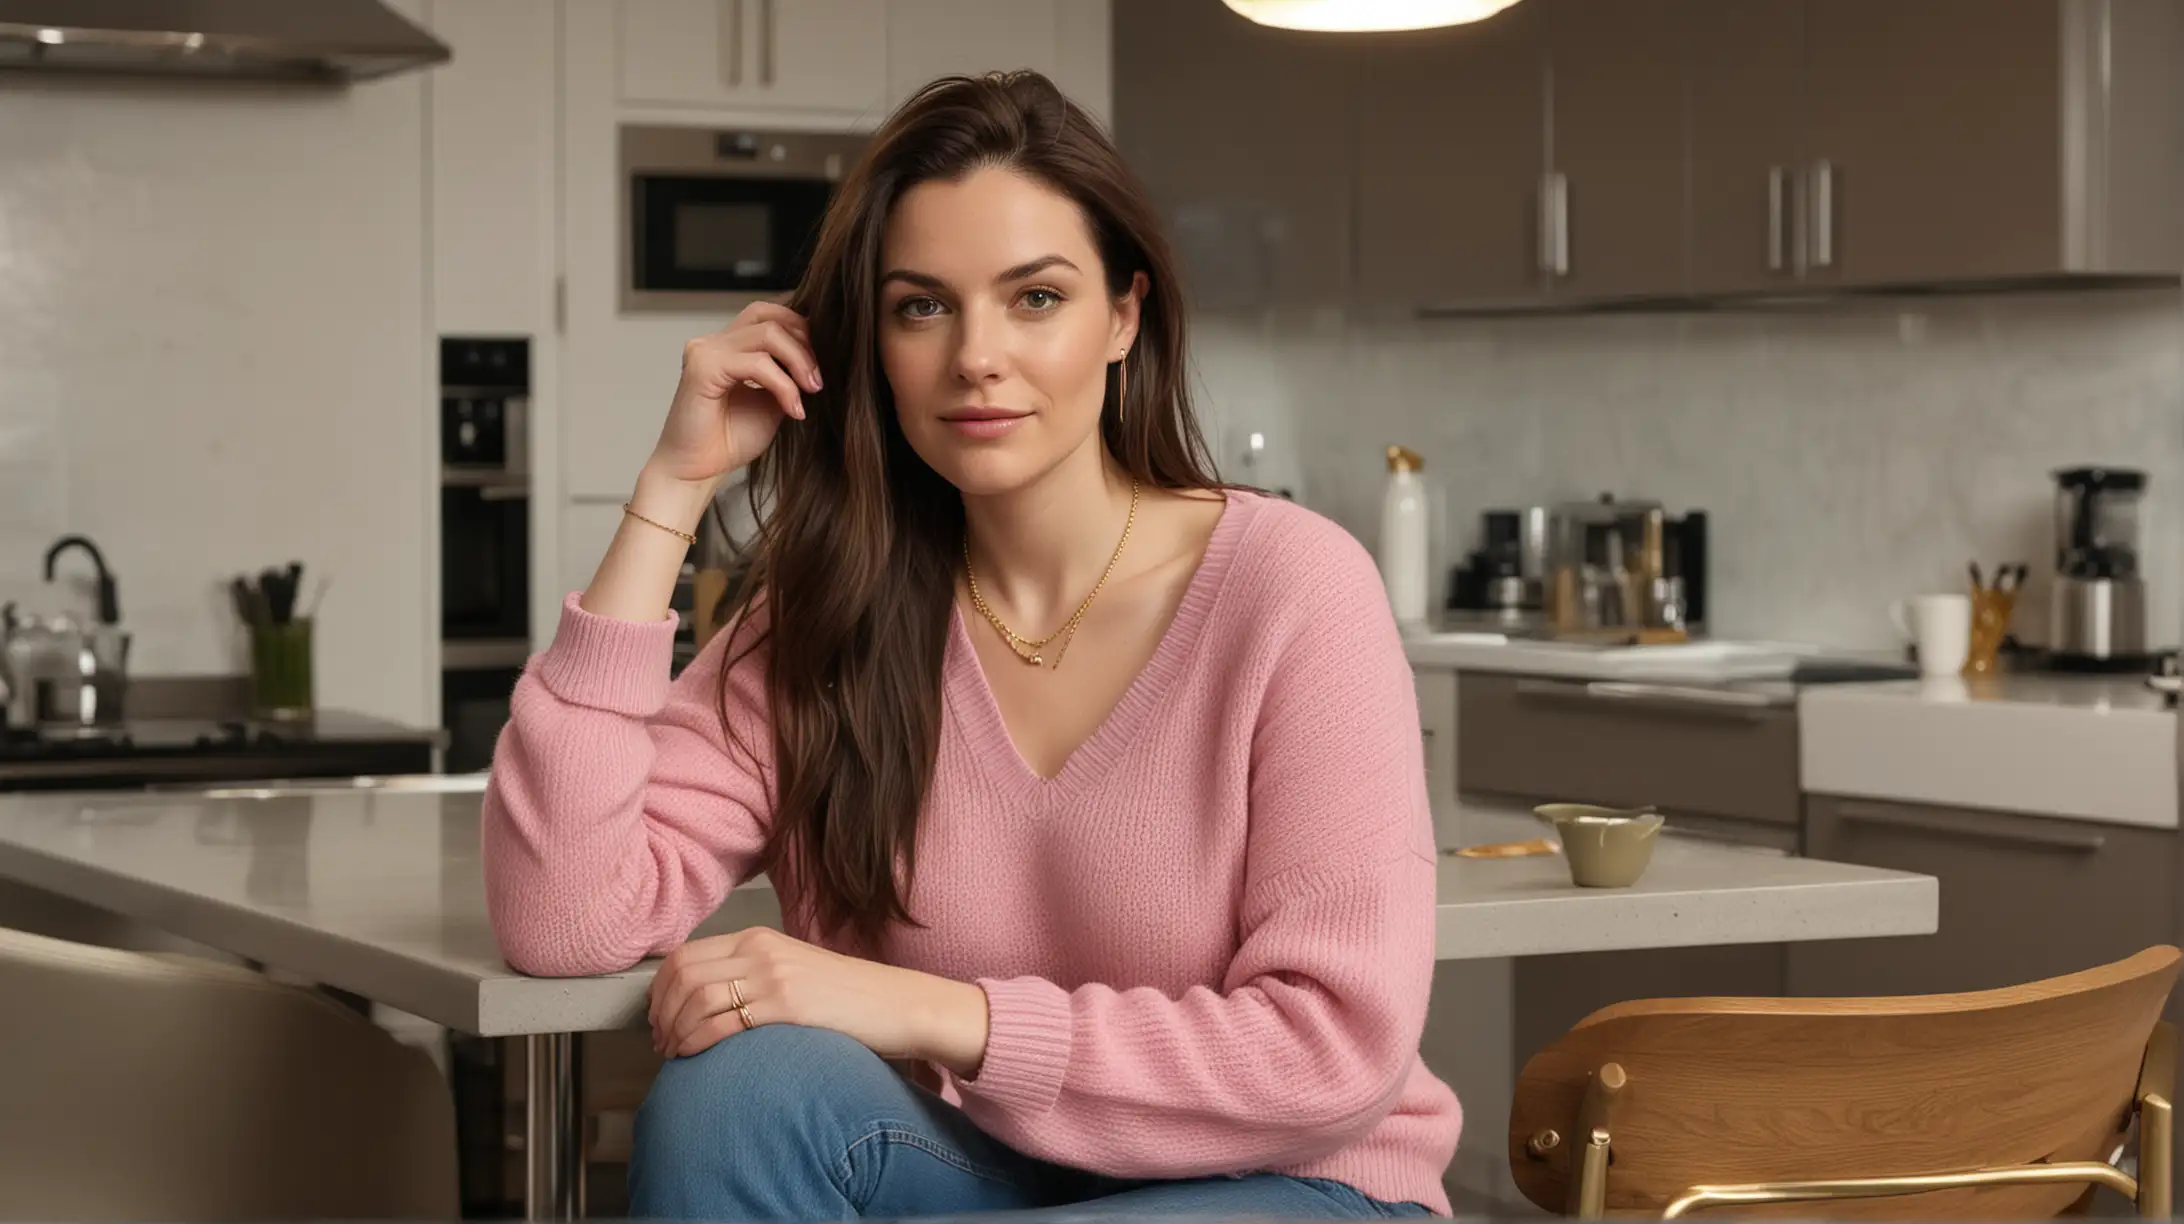 Closeup of 30 year old pale white woman with long dark brown hair, parted to the right, wearing a pink sweater, blue jeans and a gold necklace, sitting down on a kitchen chair in a modern kitchen with a cup of tea. It is a modern high rise urban apartment background at night